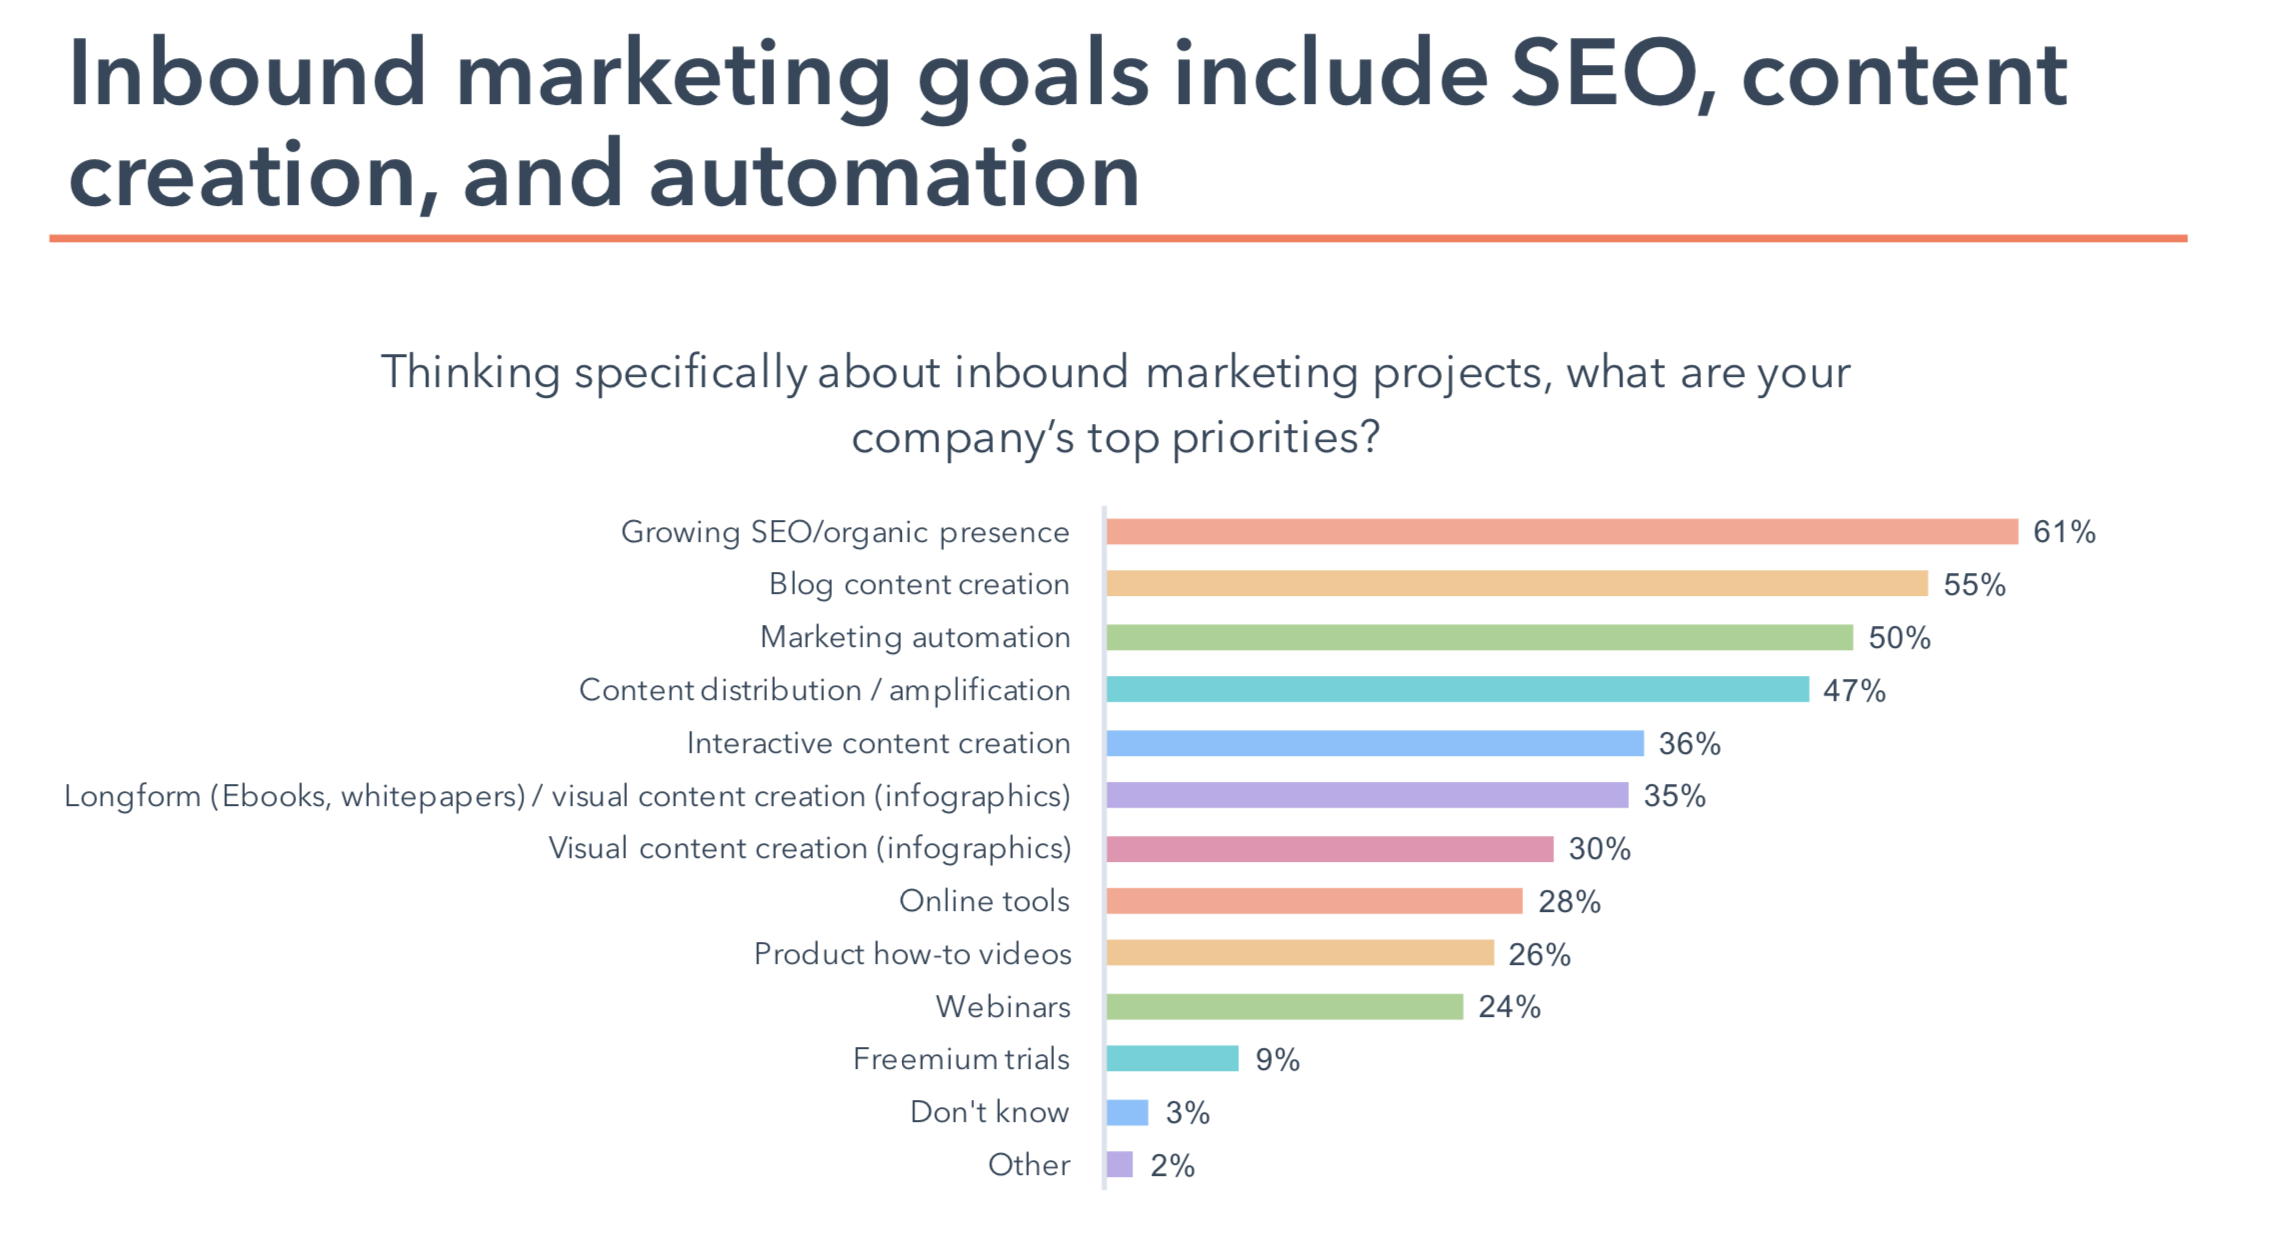 Inbound marketing goals include SEO, content creation, and automation